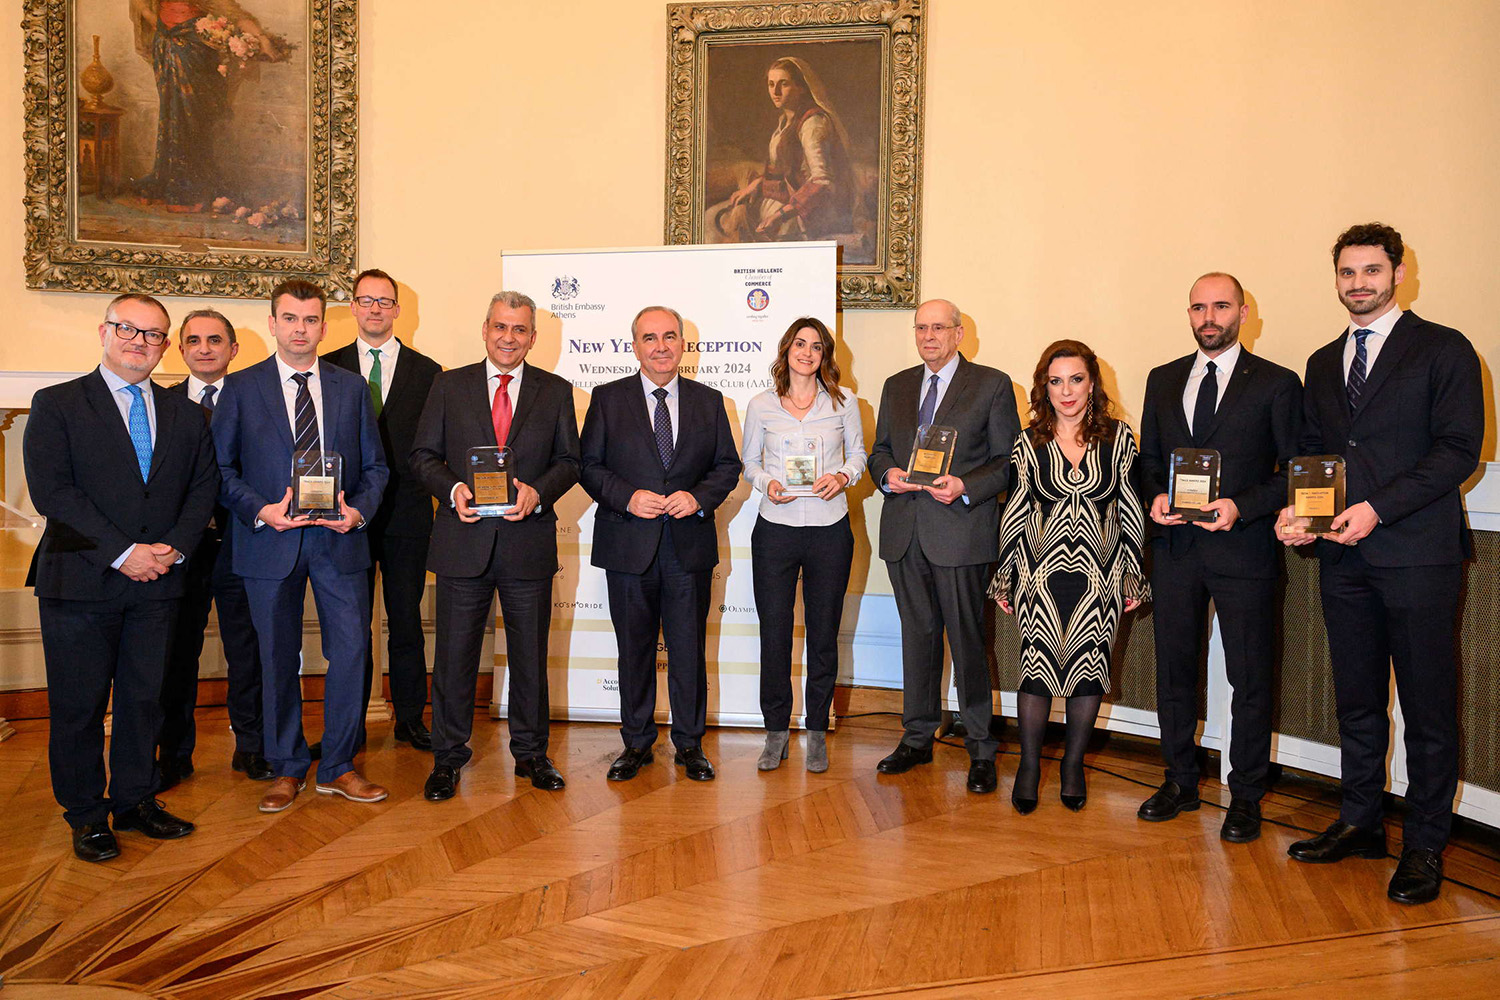 Natalia Paraskevopoulou and all the awards winners